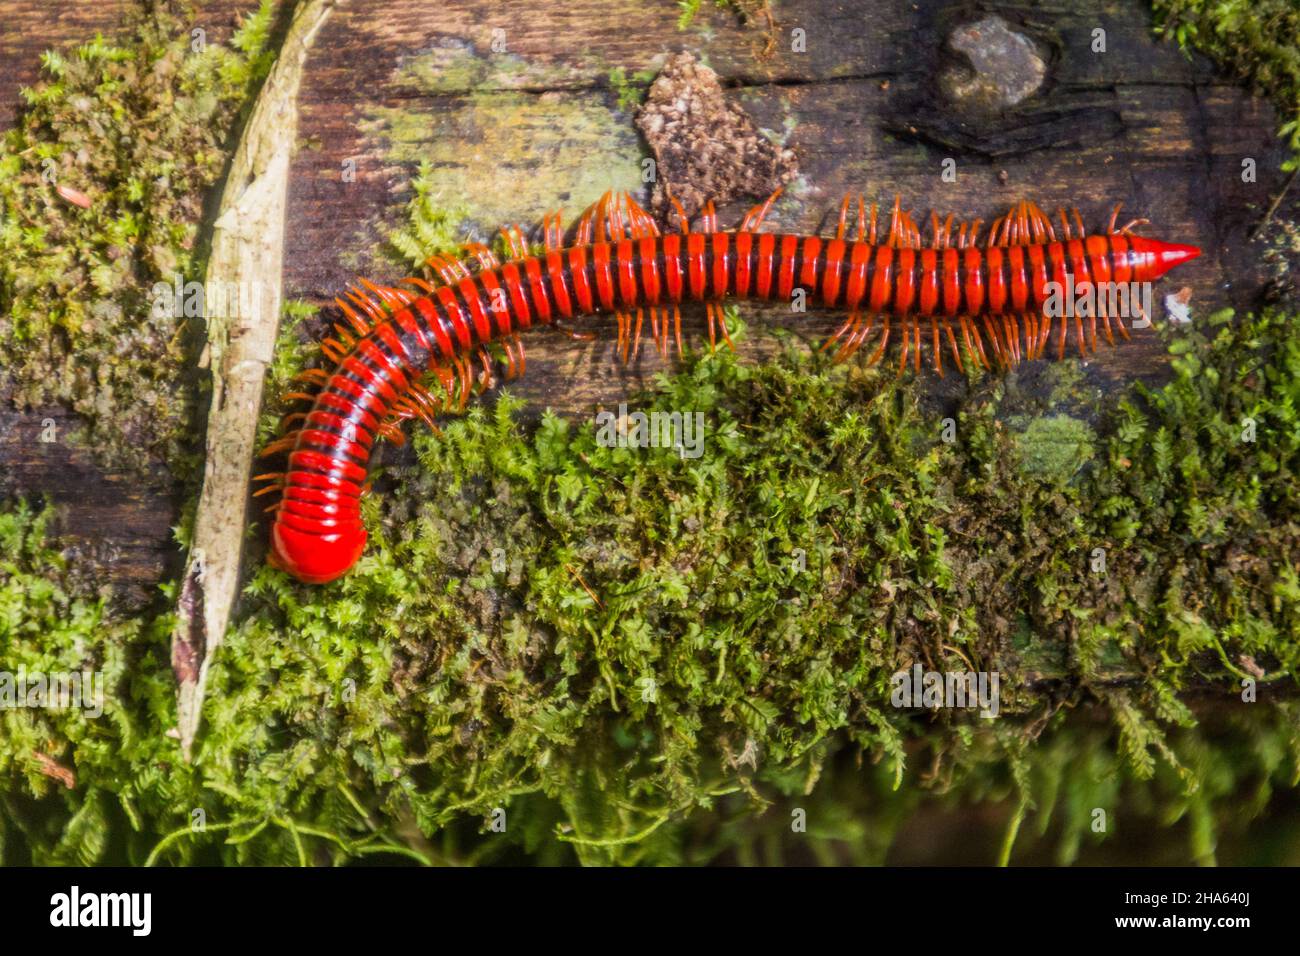 Trachelomegalus millipede in Niah National Park, Malaysia Stock Photo